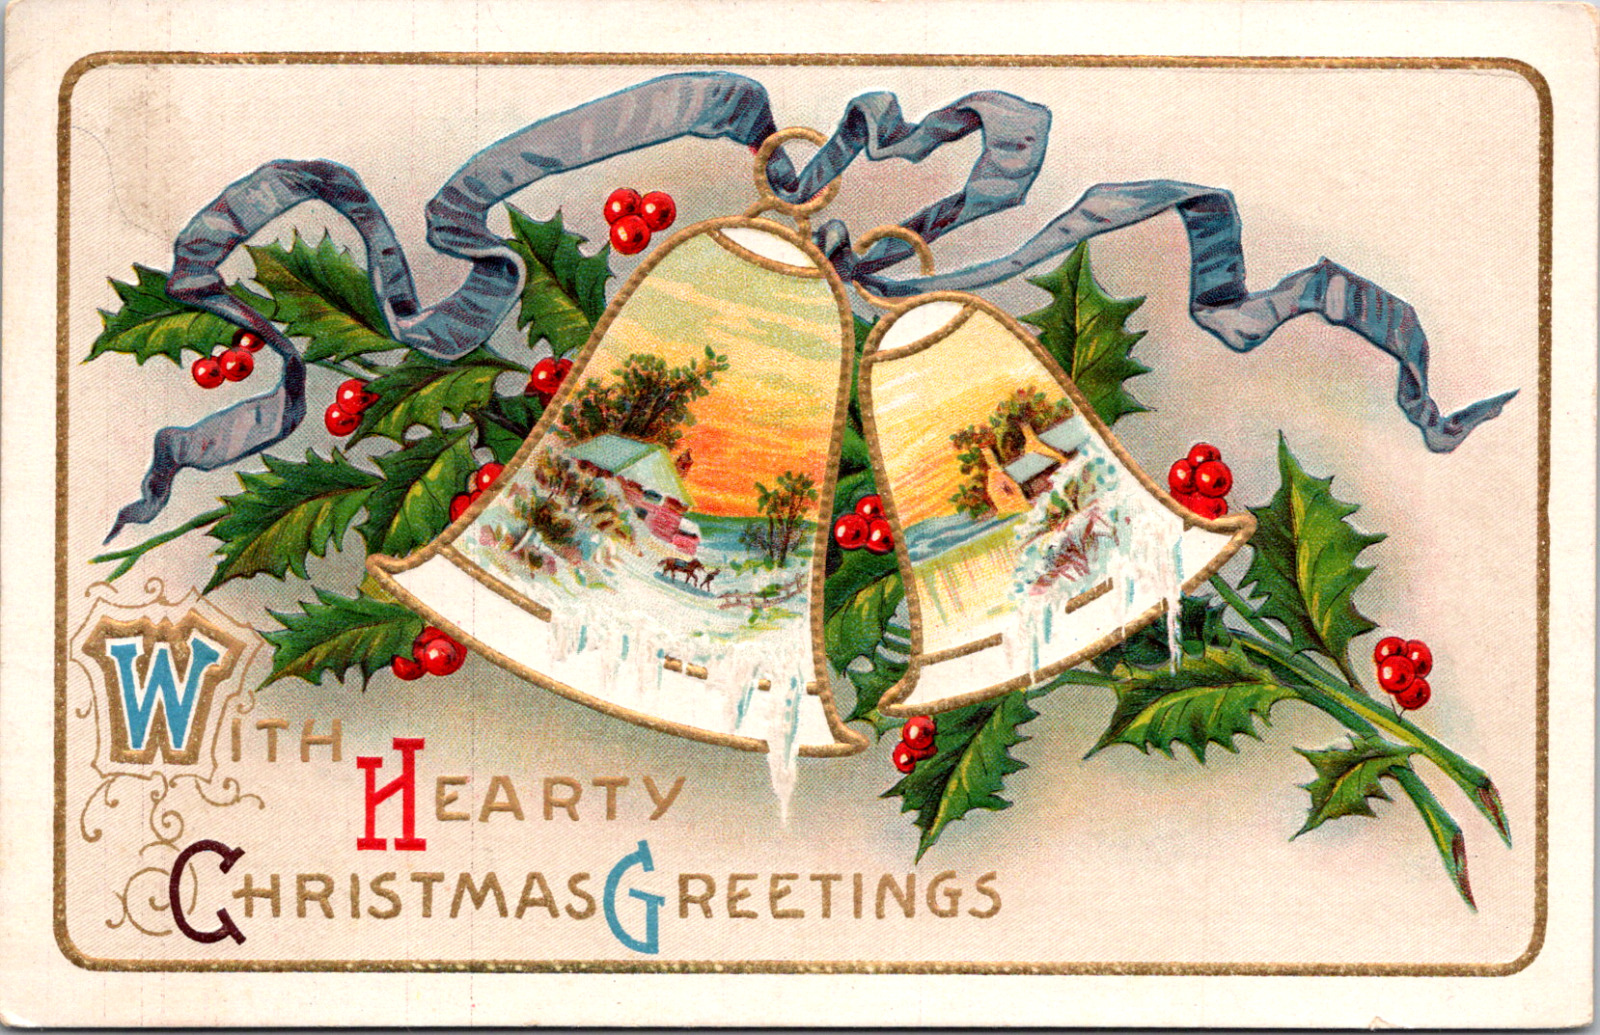 Vintage C 1910 With Hearty Christmas Greetings Bells Winter Snow Ice Postcard 